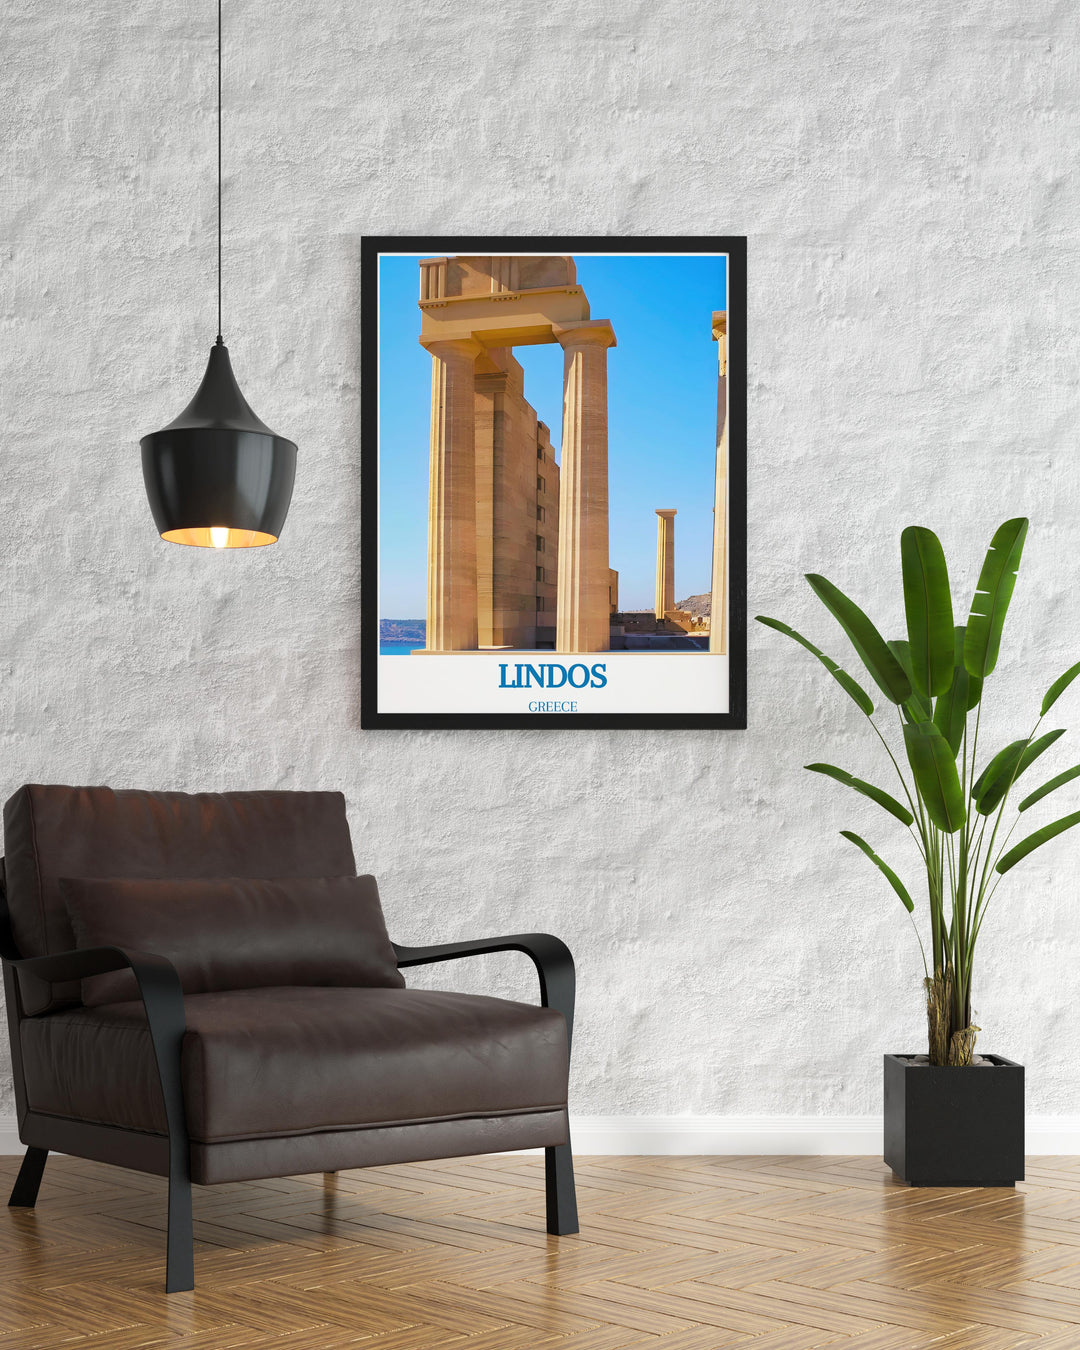 Custom print of the Acropolis of Lindos, tailored to fit personal taste and interior design themes.